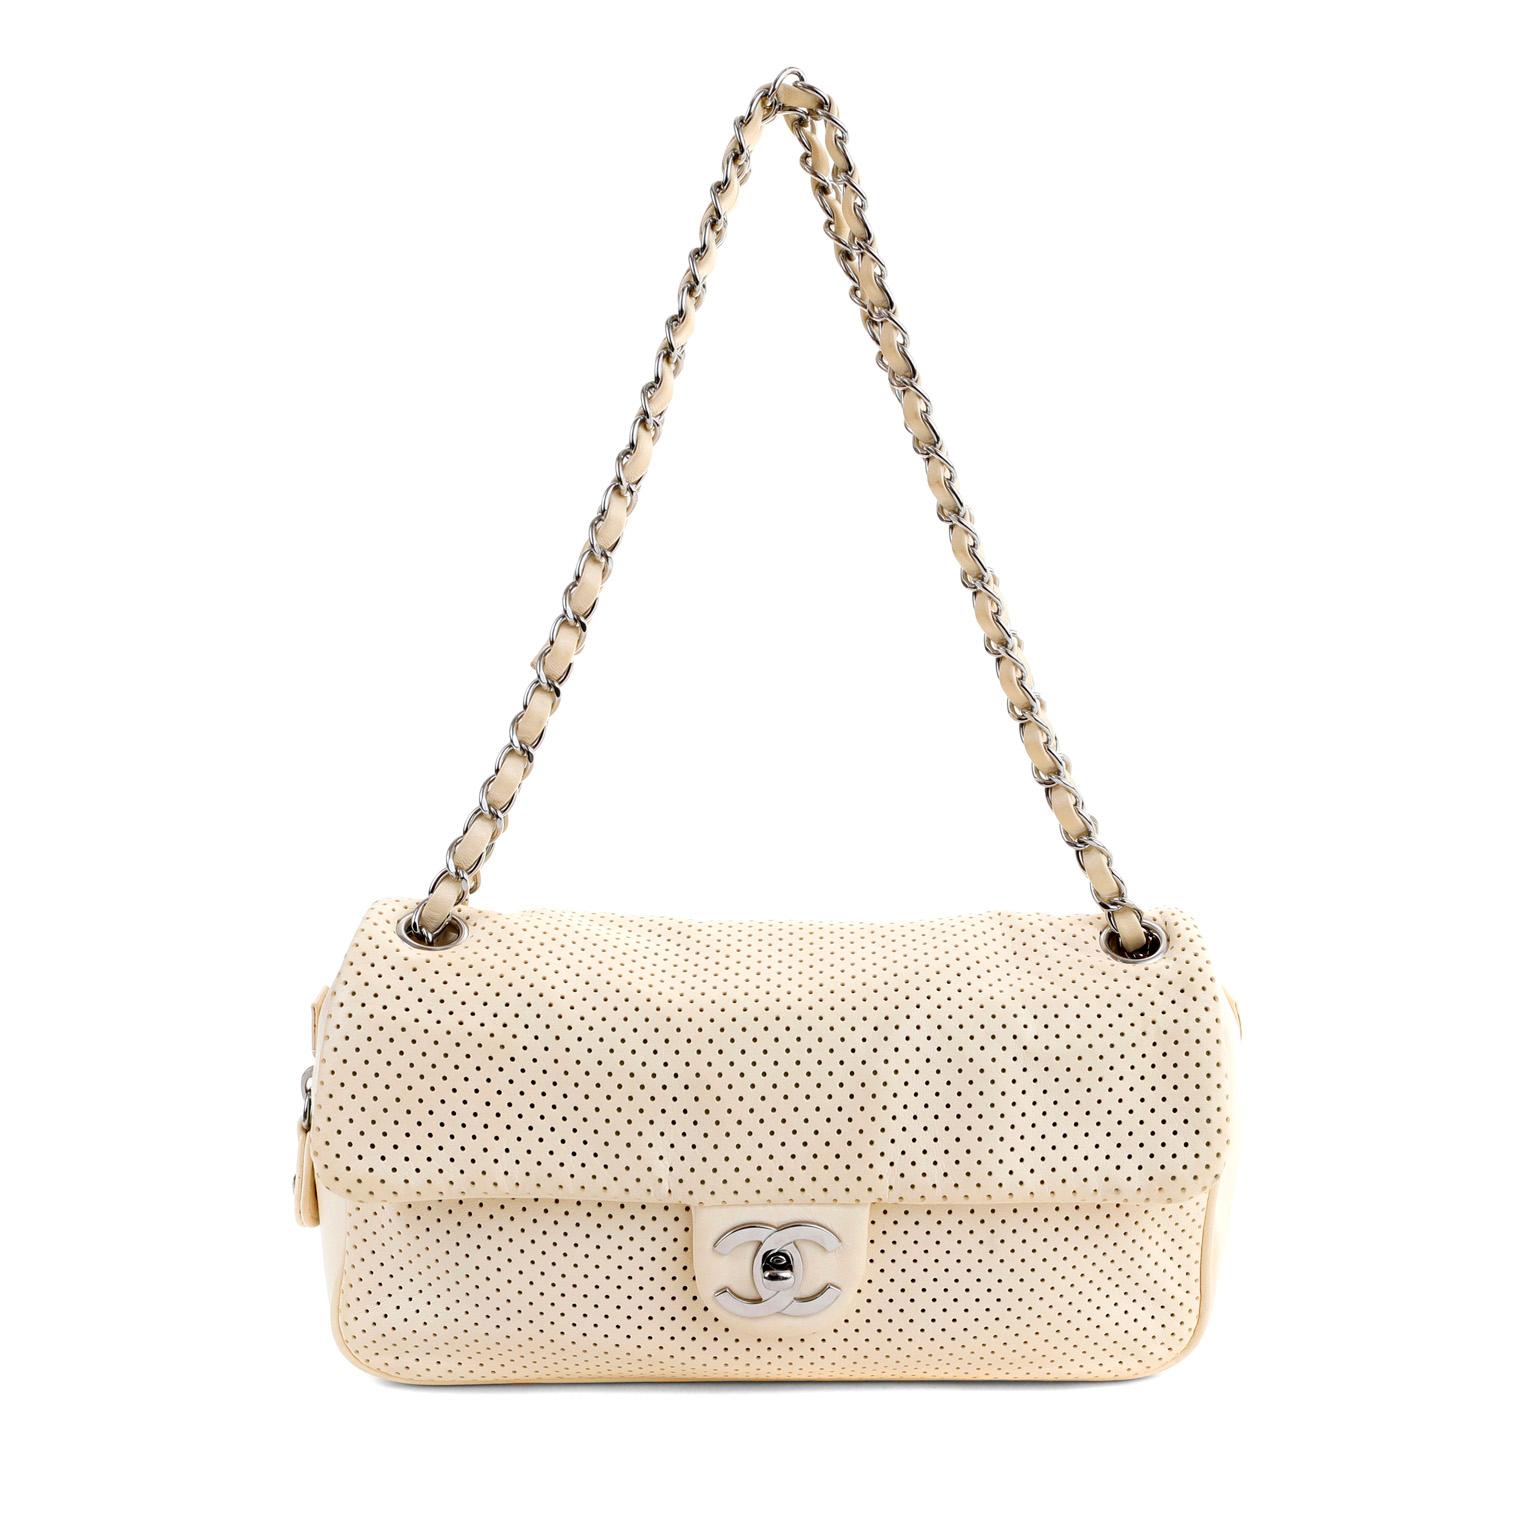 Chanel Pale Yellow Perforated Leather Baseball Spirit Flap Bag In Excellent Condition For Sale In Palm Beach, FL